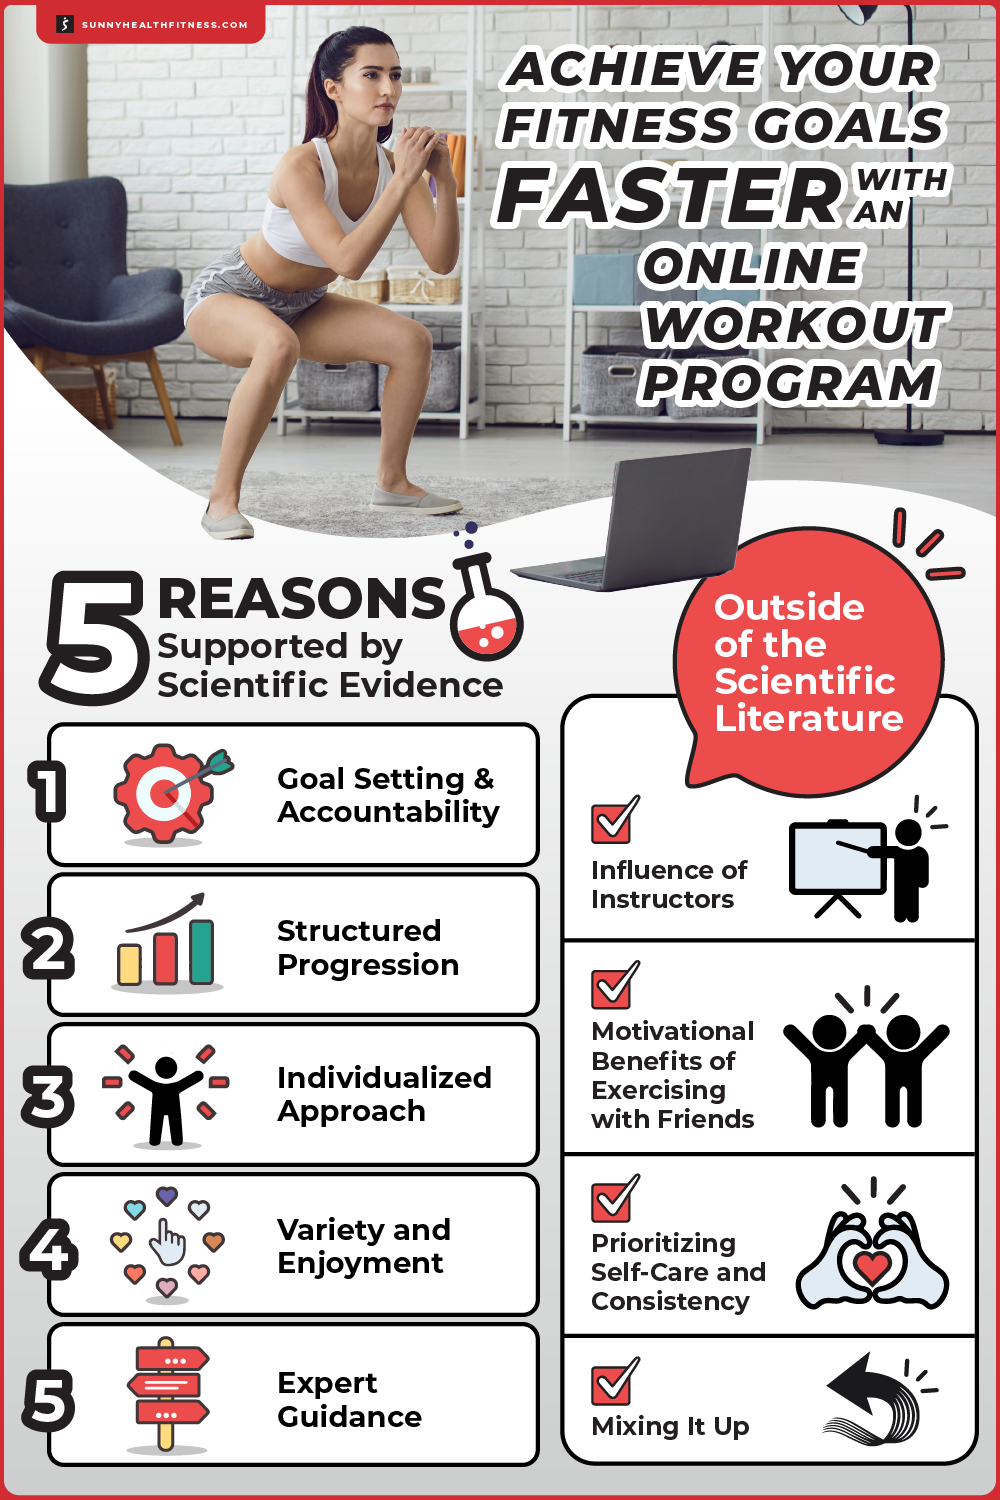 Achieve Your Fitness Goals Faster with an Online Workout Program Infographic